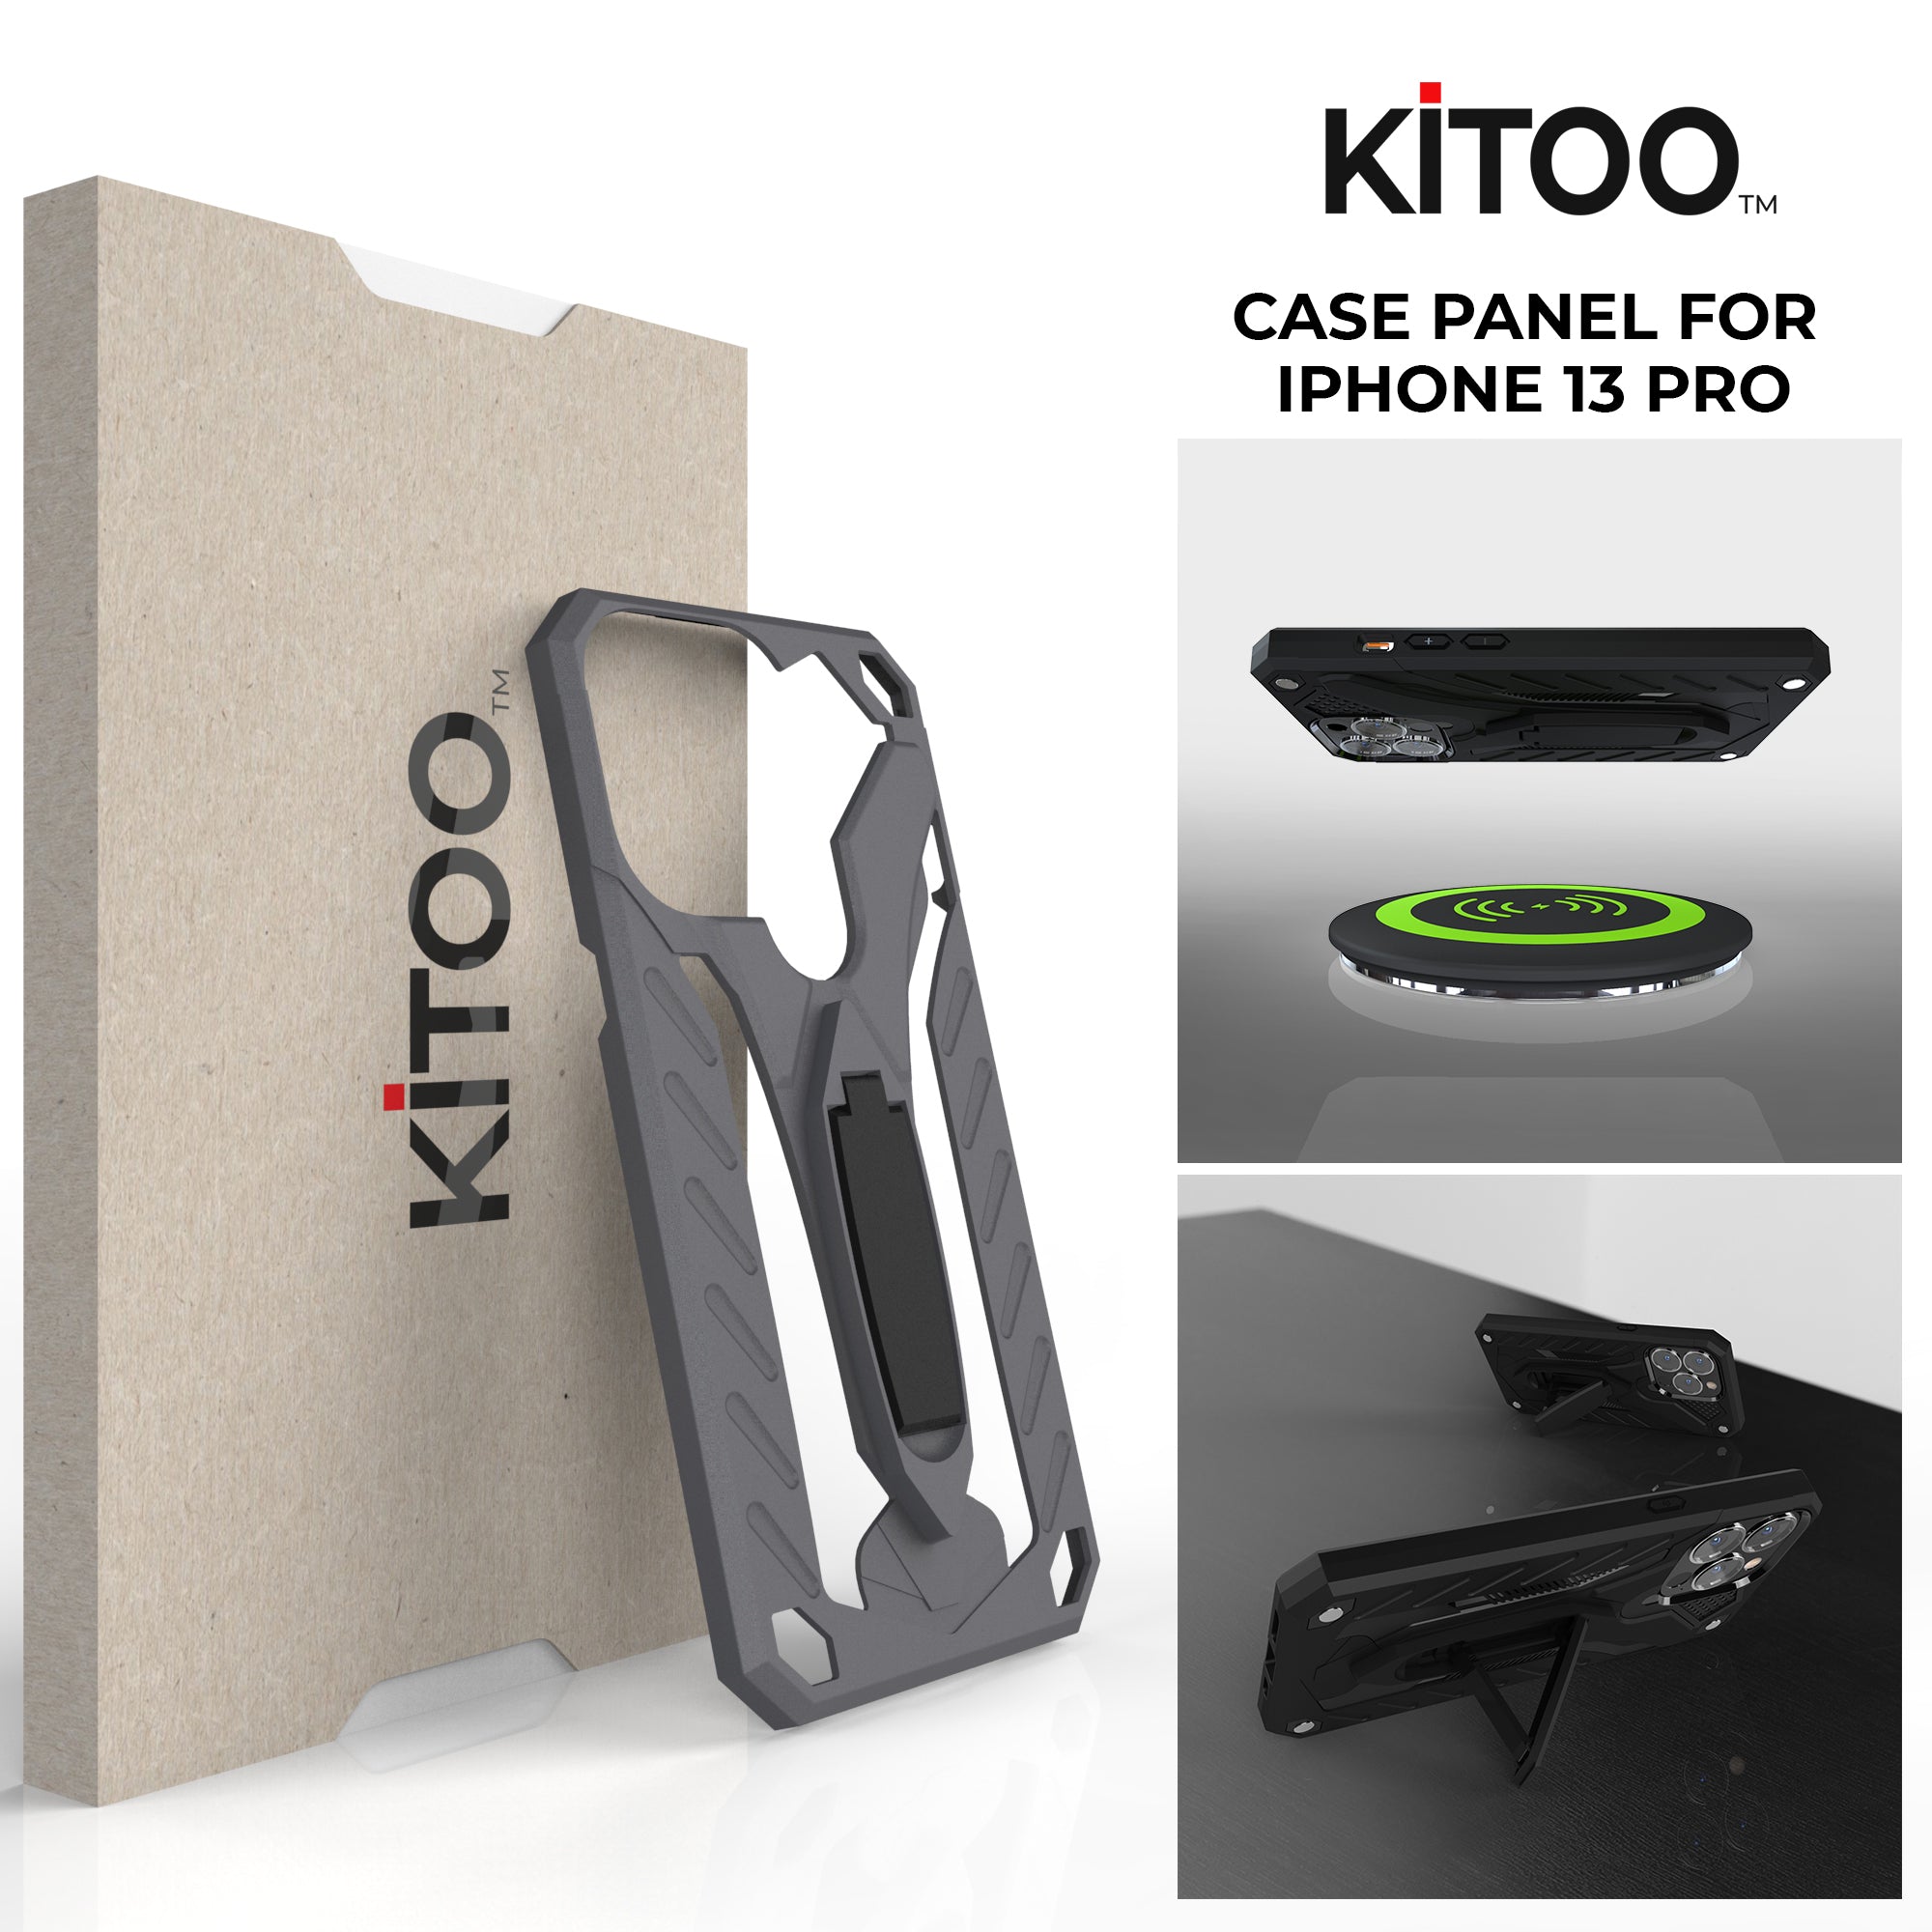 Kitoo Kickstand Panel Designed for iPhone 13 Pro case (Spare Part only) - Grayness